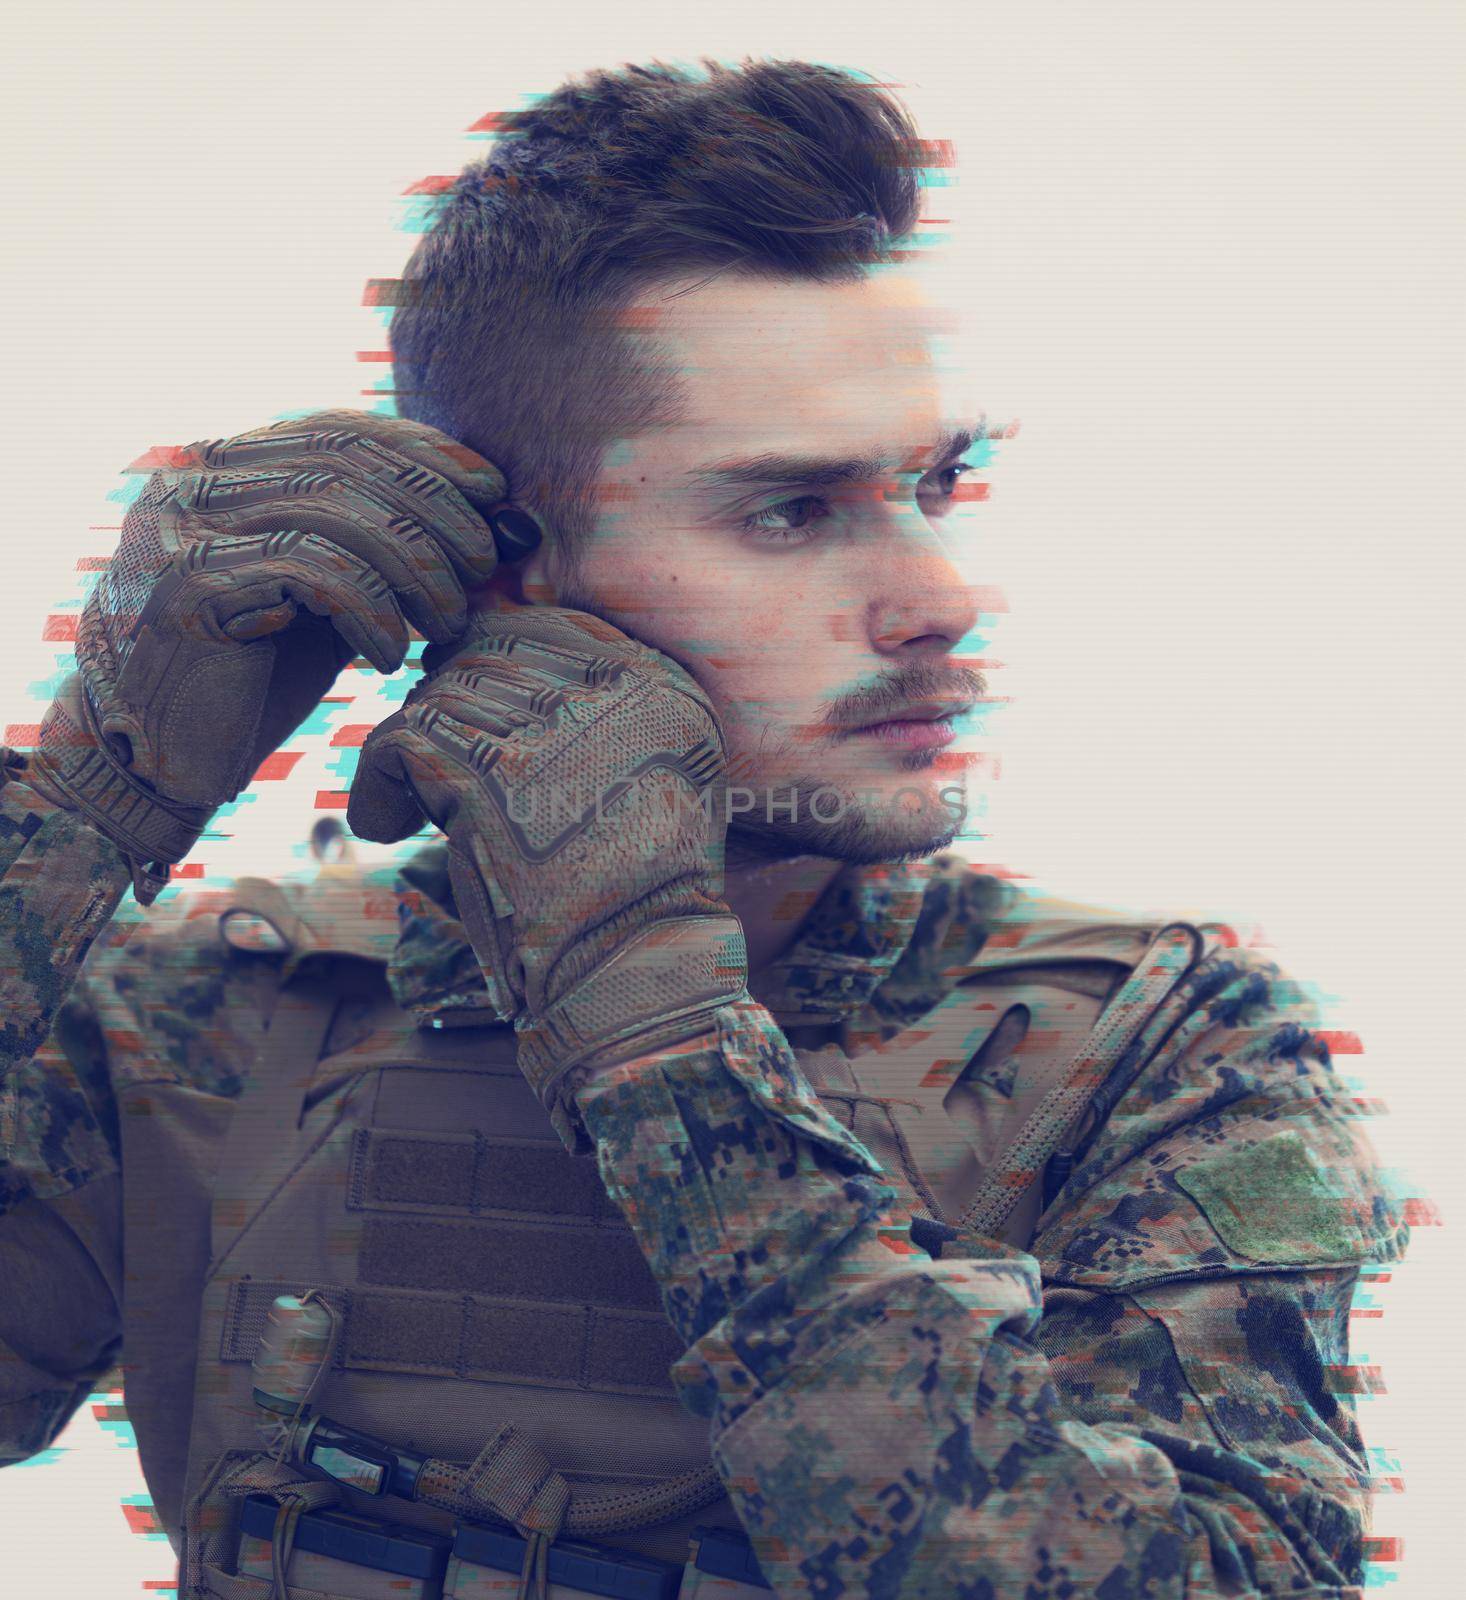 american  marine corps special operations soldier preparing tactical and communication gear for action battle glitch design effect